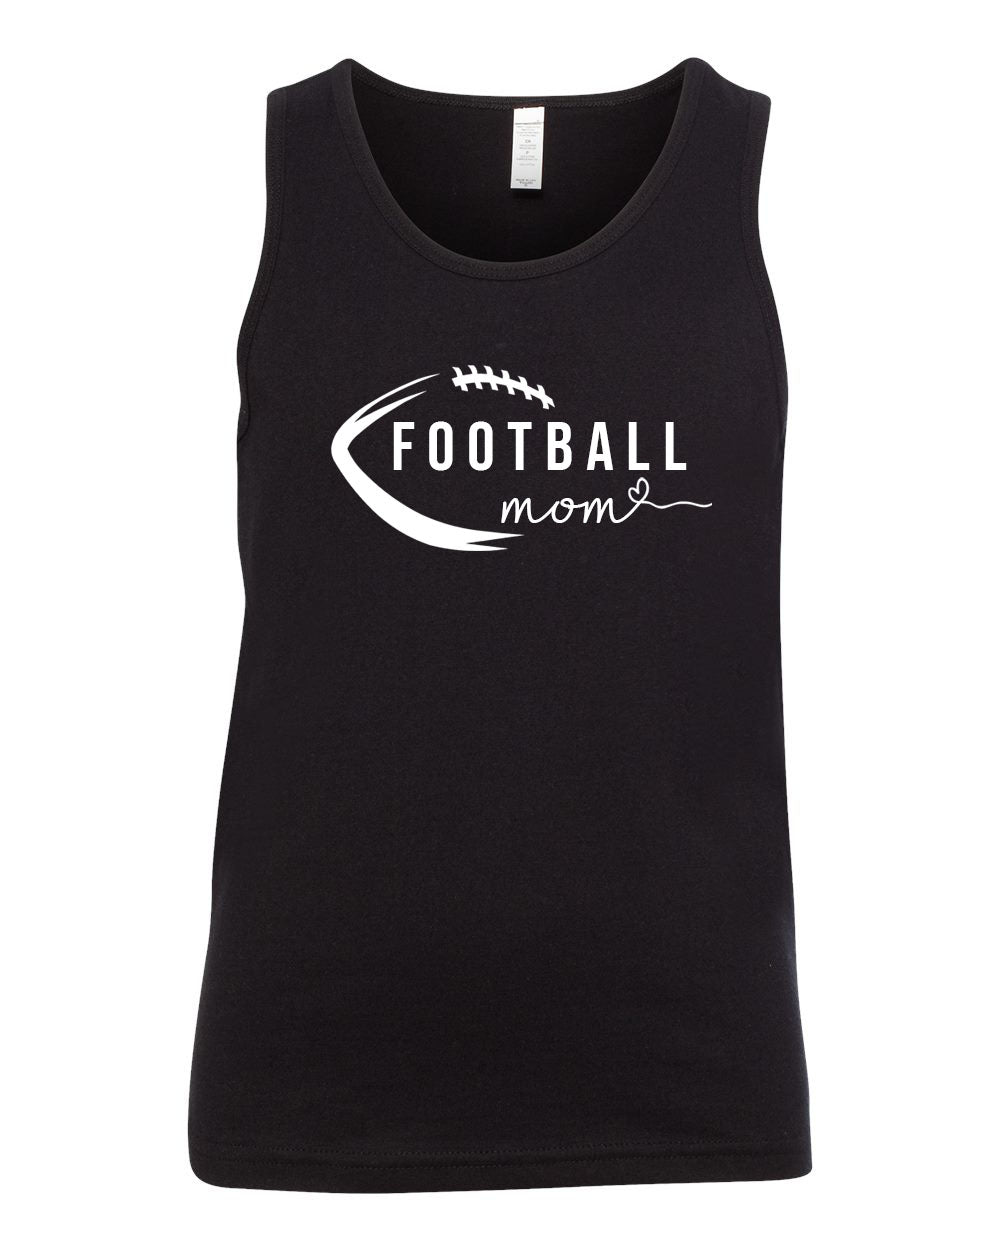 High Point Football design 5 Ladies Muscle Tank Top